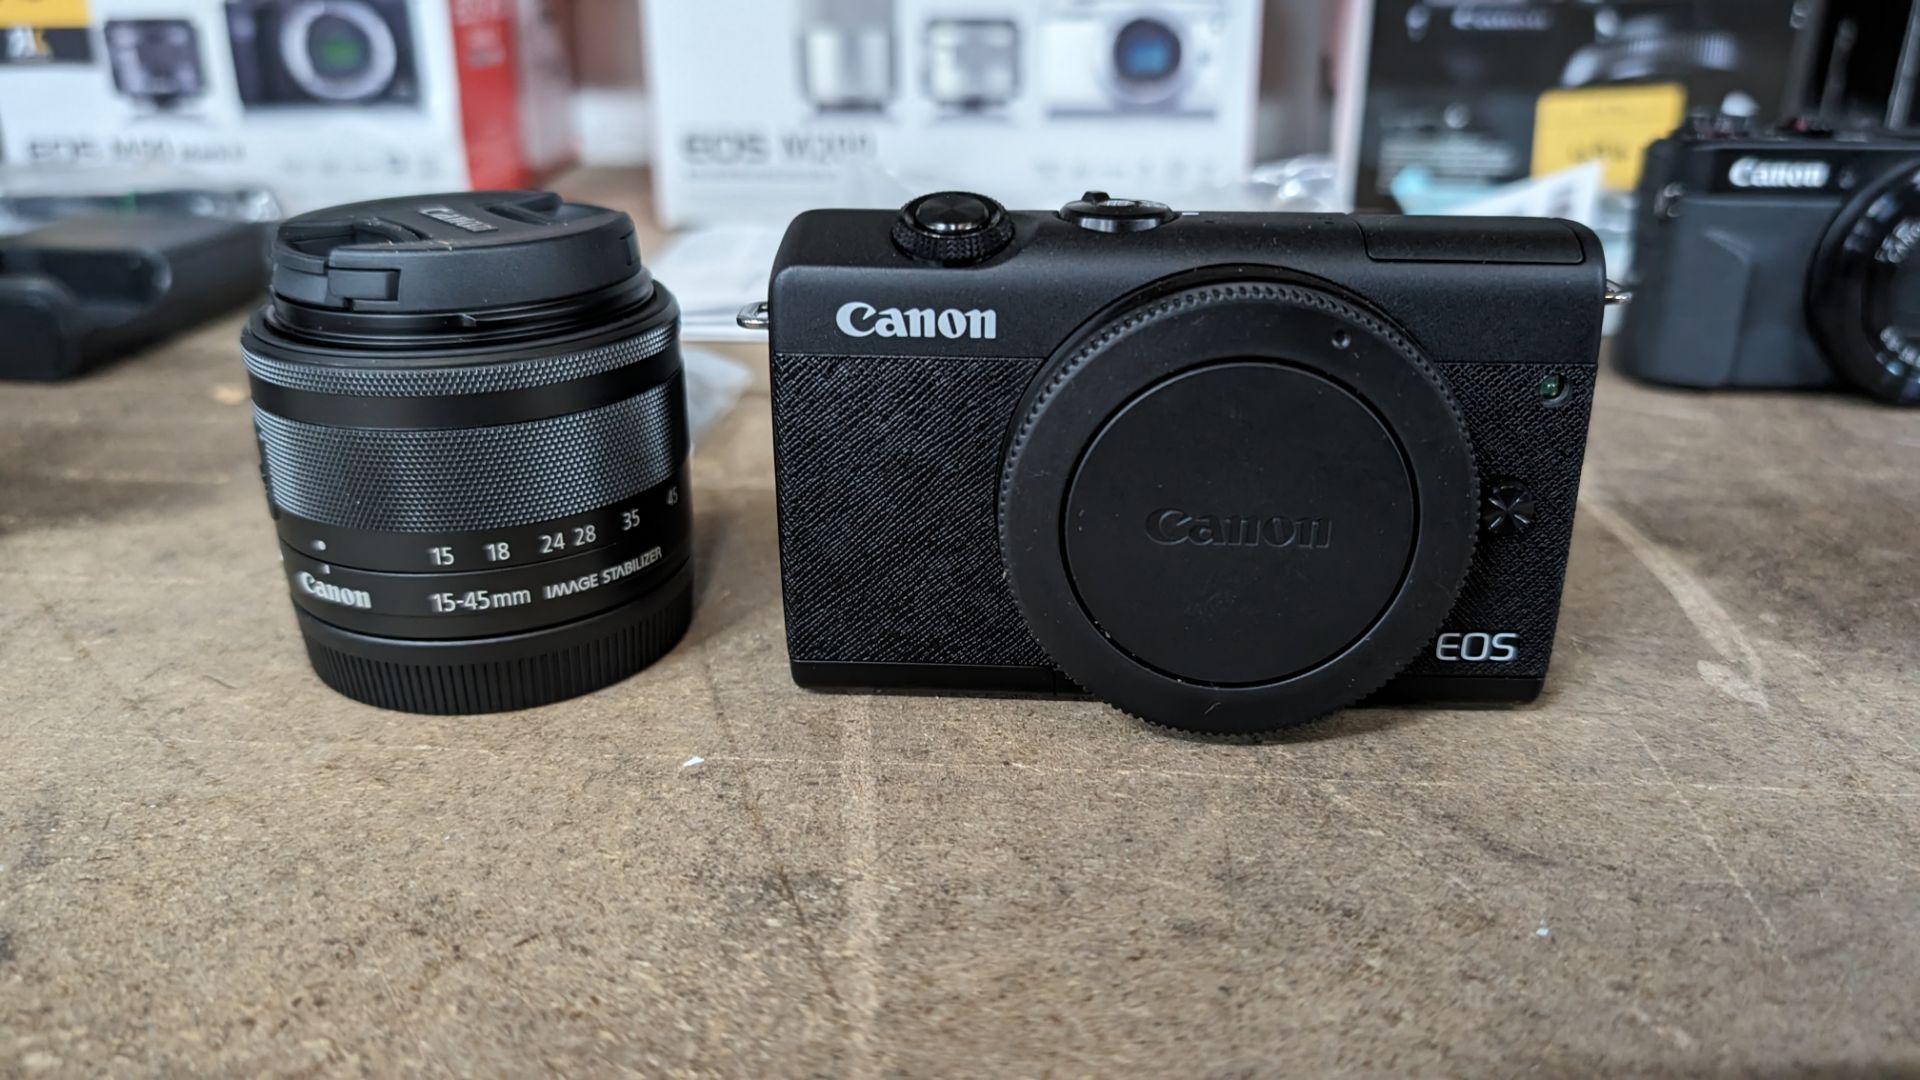 Canon EOS M200 camera kit, including 15-45mm image stabilizer lens, plus battery and charger - Image 4 of 12